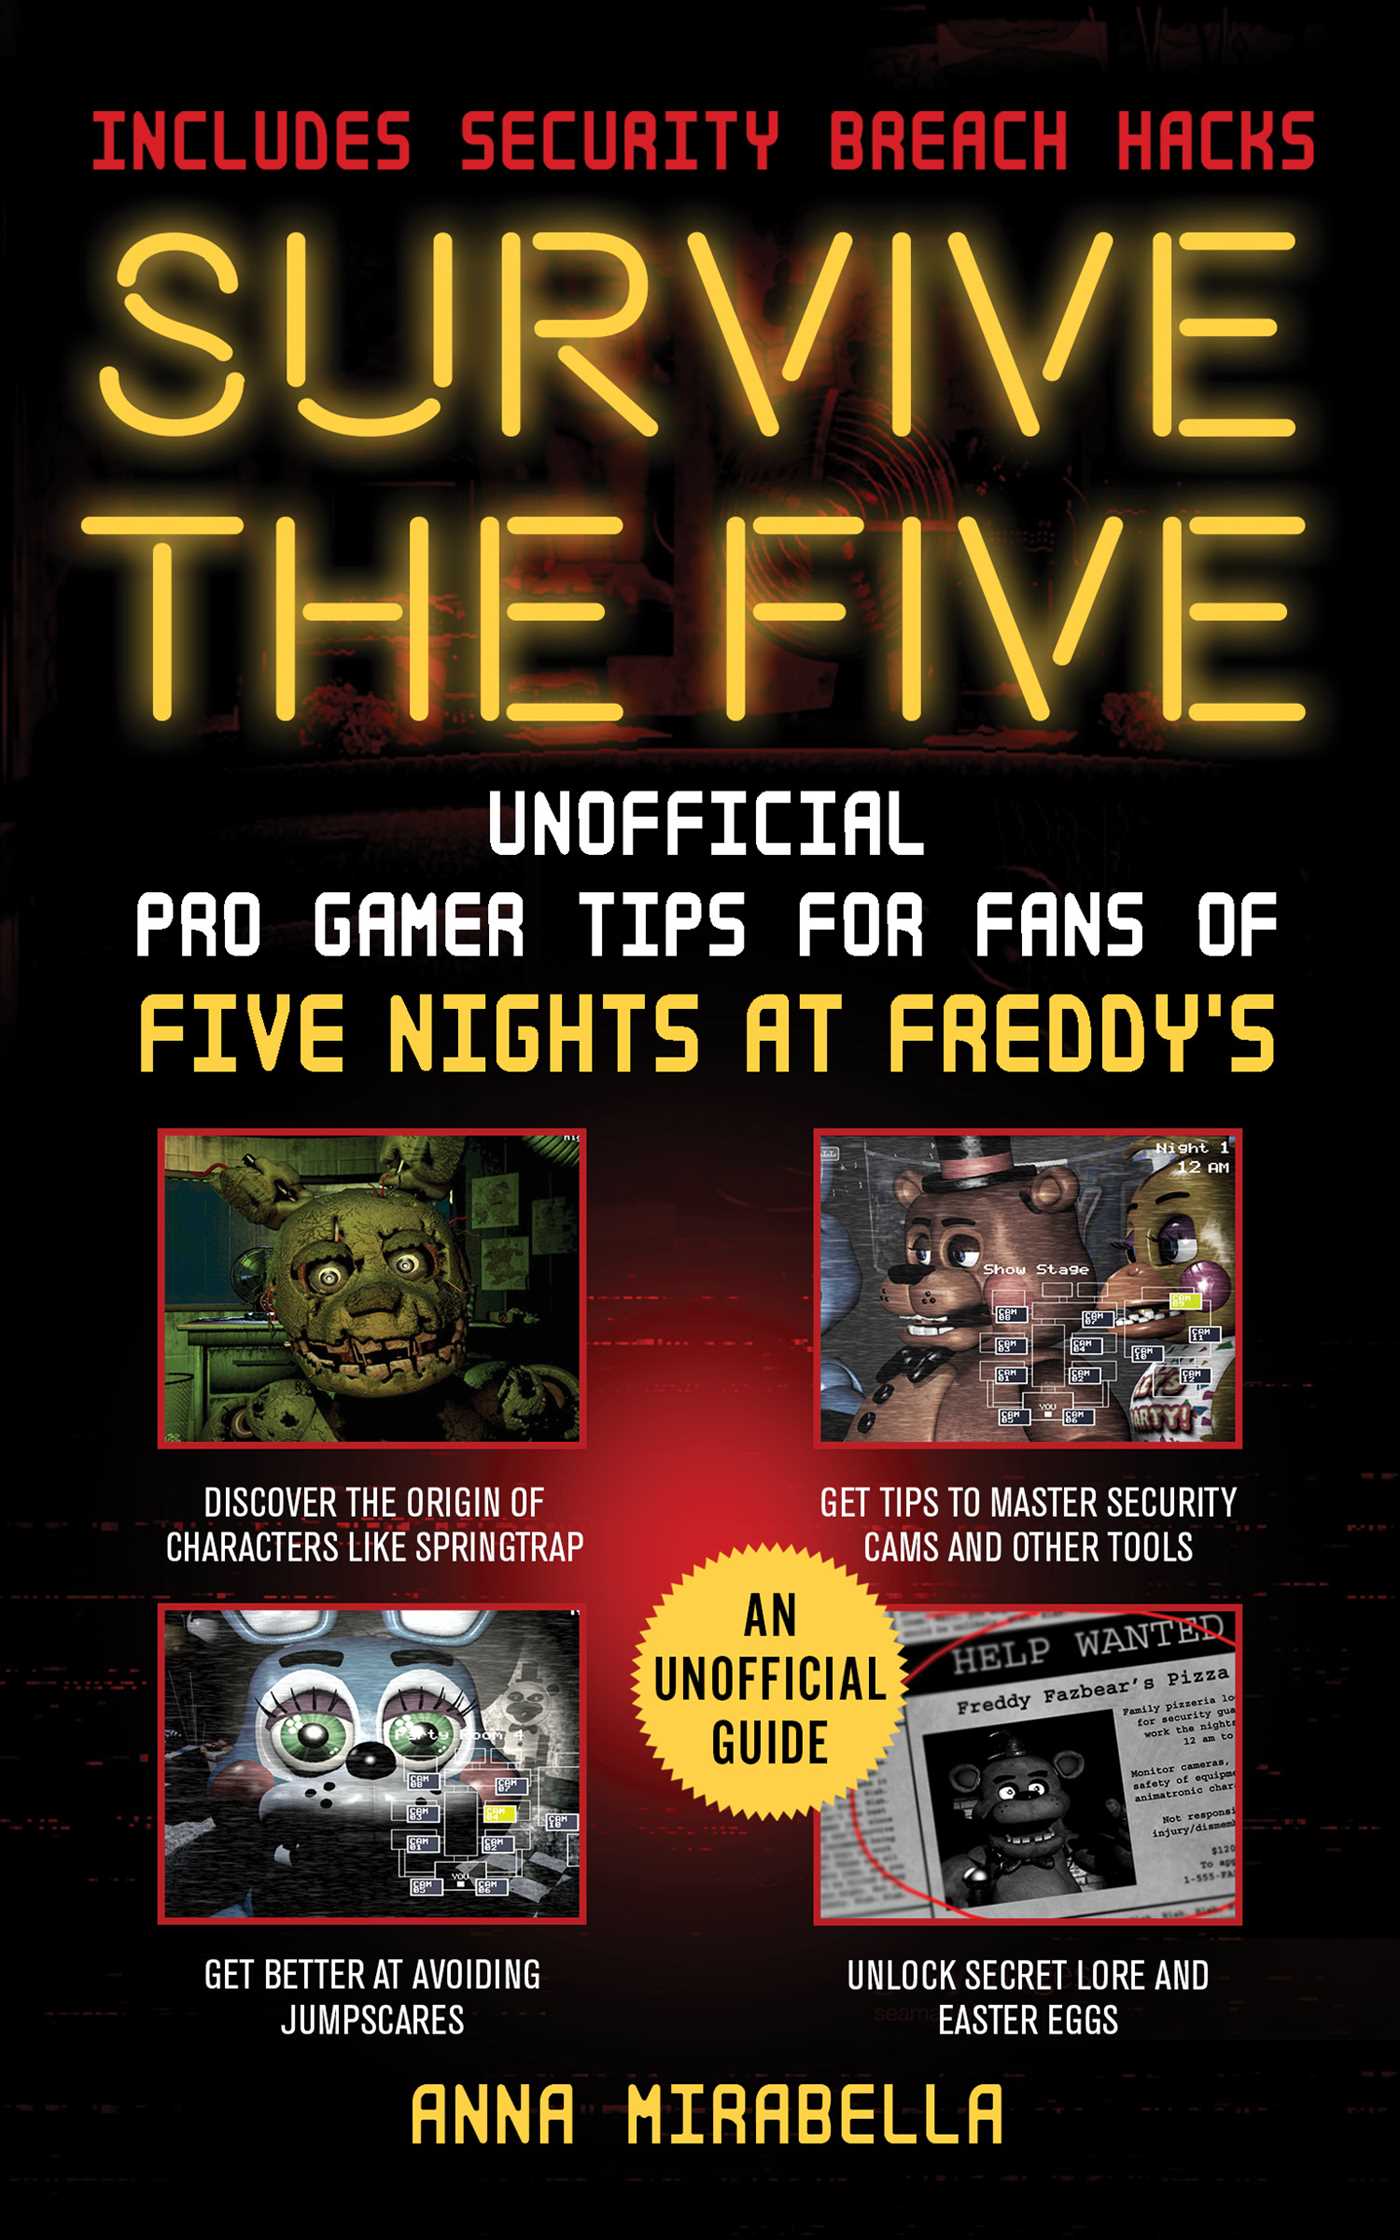 Survive the Five : Unofficial Pro Gamer Tips for Fans of Five Nights at Freddy's—Includes Security Breach Hacks | Mirabella, Anna